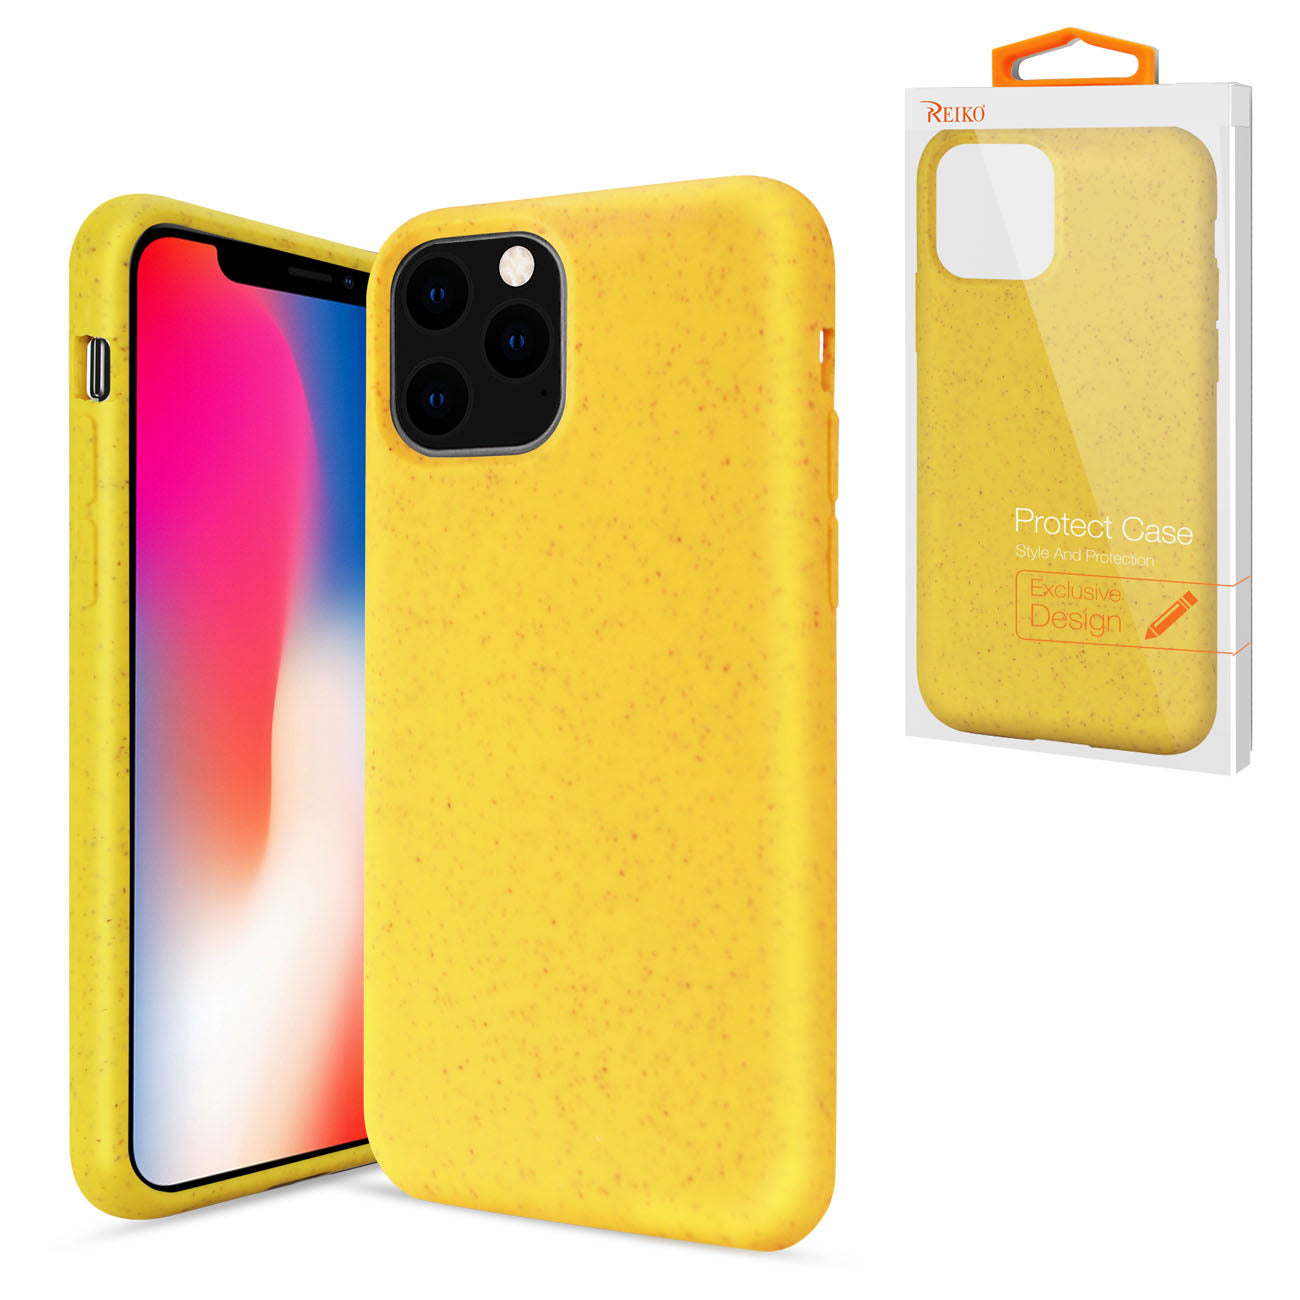 APPLE IPHONE 11 PRO MAX Wheat Bran Material Silicone Phone Case In Yellow